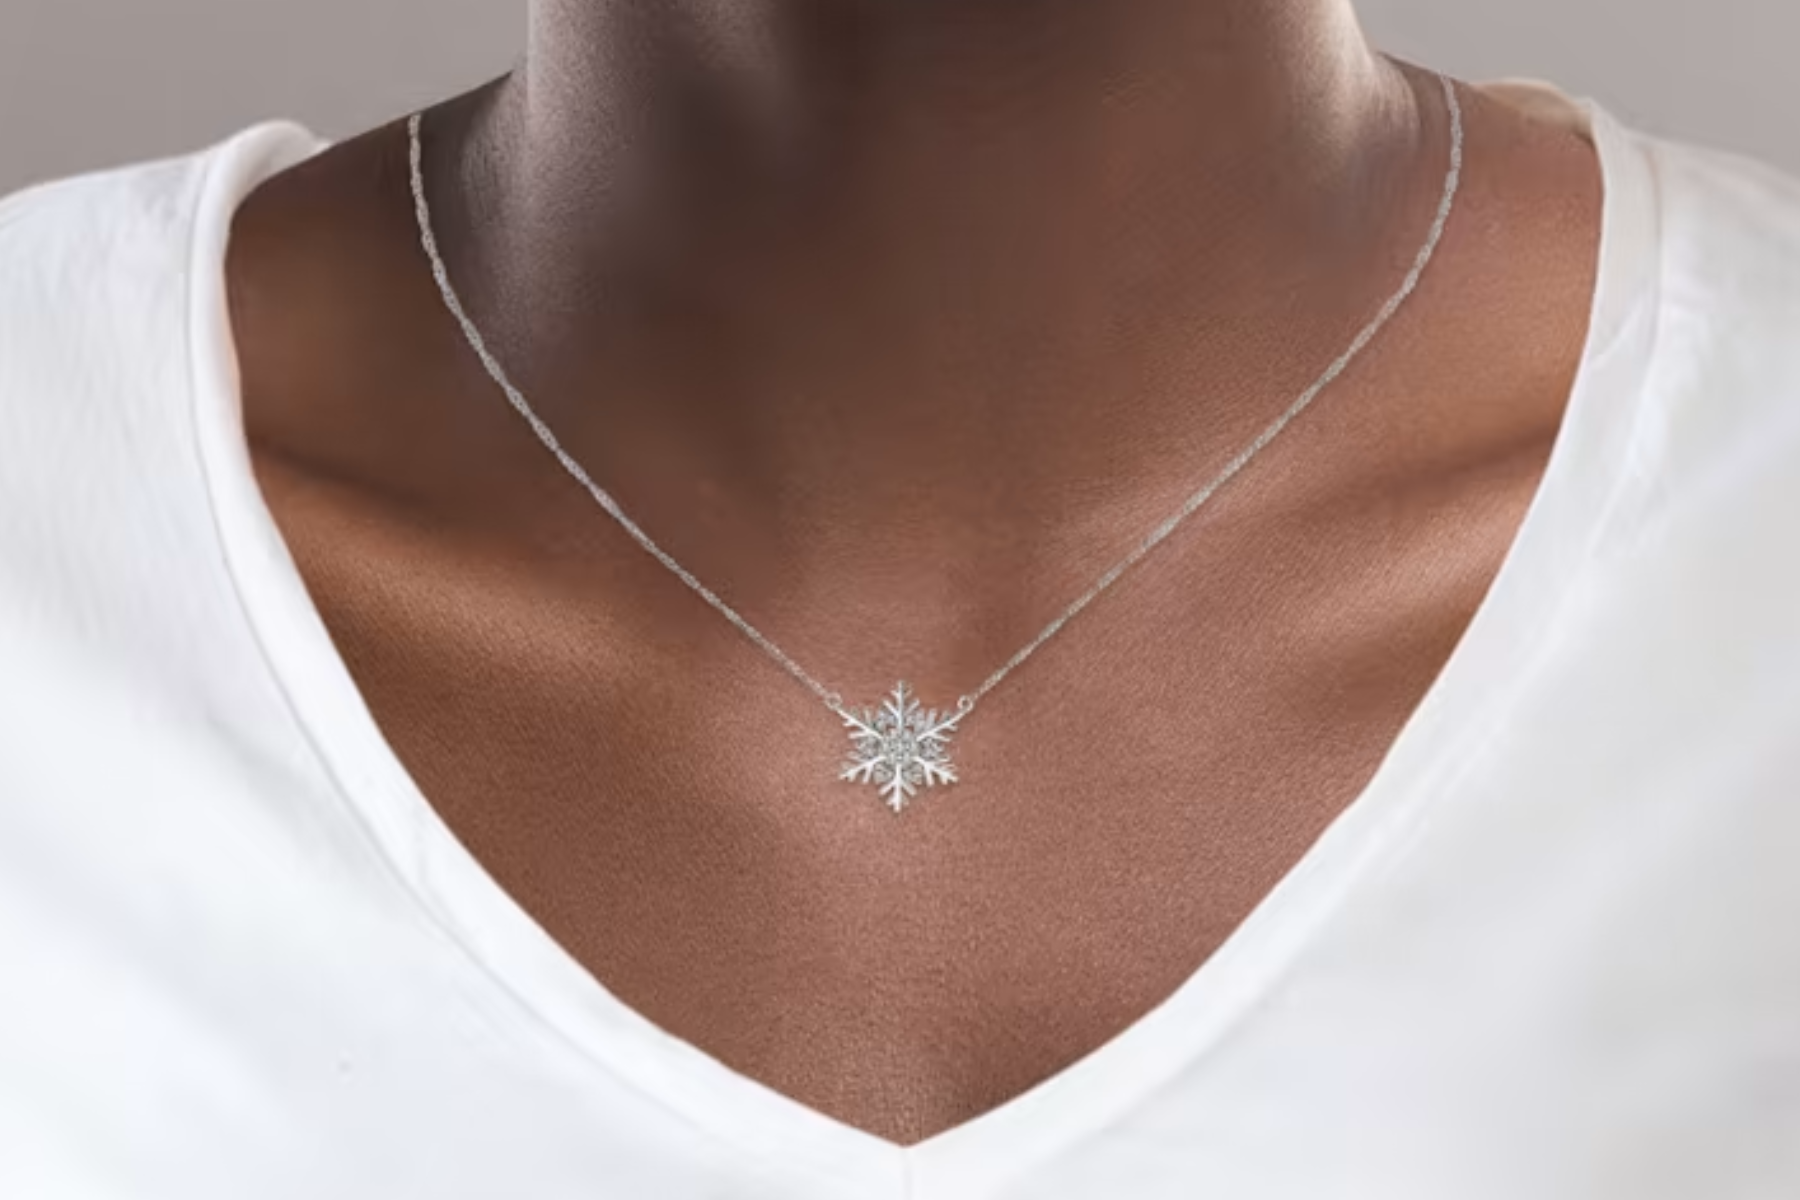 A man with dark skin wearing a necklace with a snowflake pendant